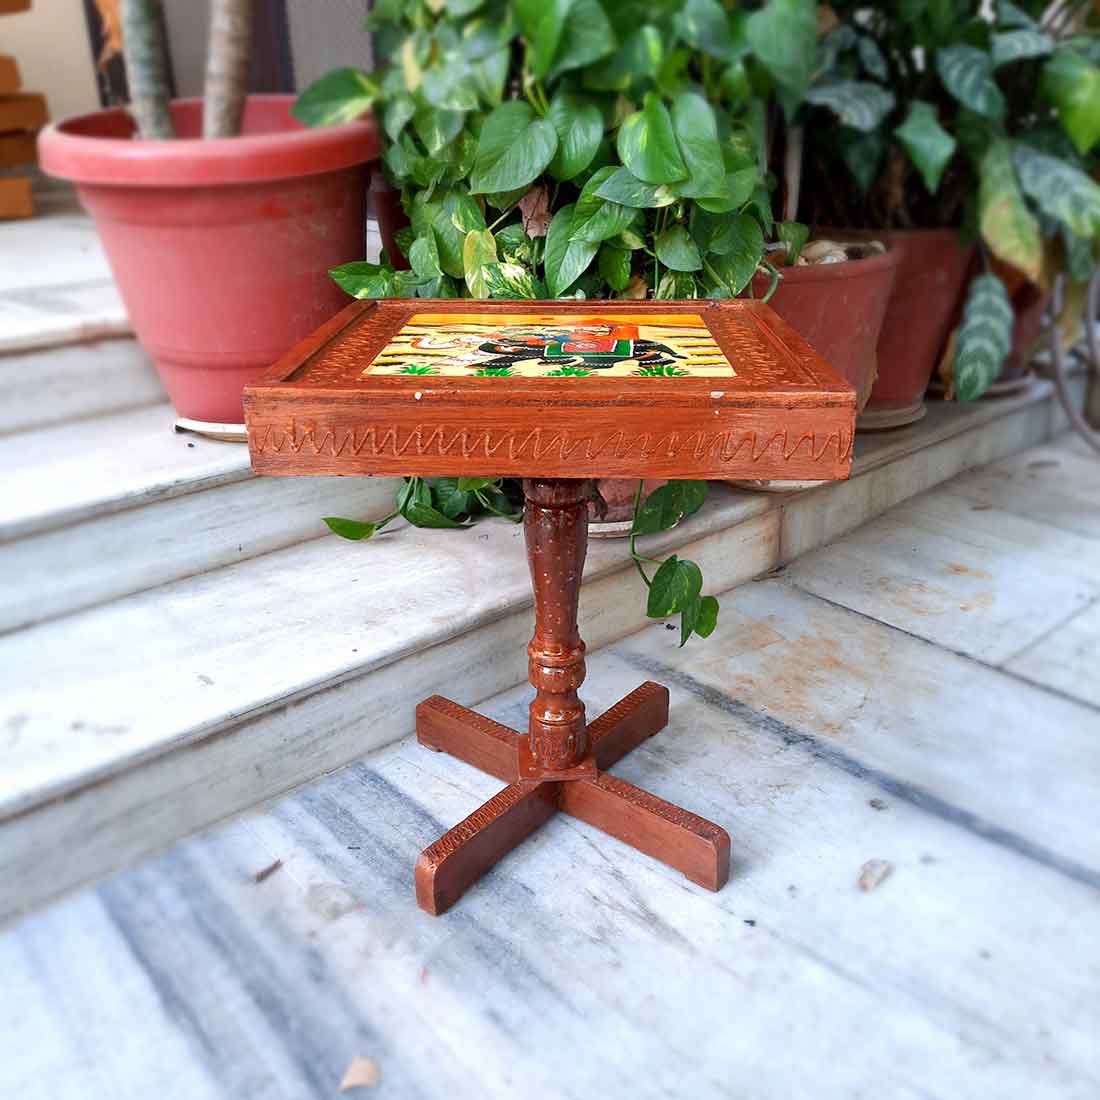 Side Table | Wooden End Tables Cum Stool - for Keeping Lamp, Vases & Plants | Small Stools - for Sitting, Bedside, Home Decor, Corners, Sofa Side Stool, Office & Gifts - 18 Inch